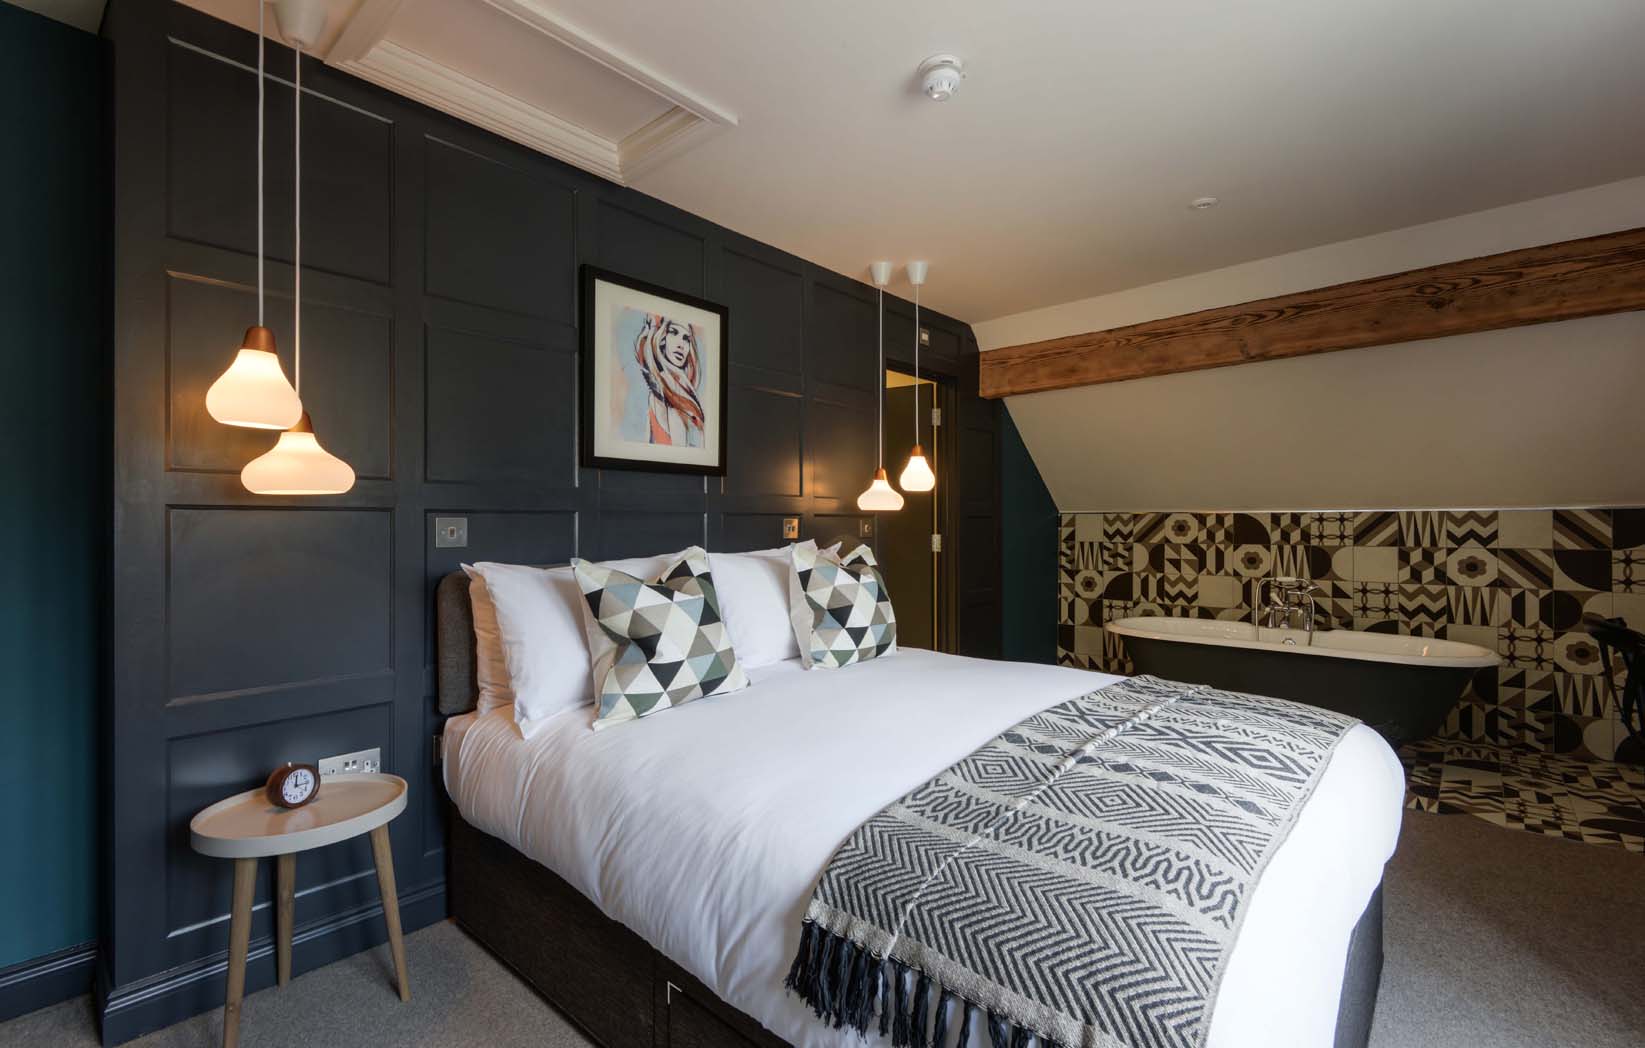 Watery Coombe - Romantic room painted in a dark palette with contrasting, crisp white bedlinen. A roll-top bath sits to the side of the room underneath an original wooden beam.